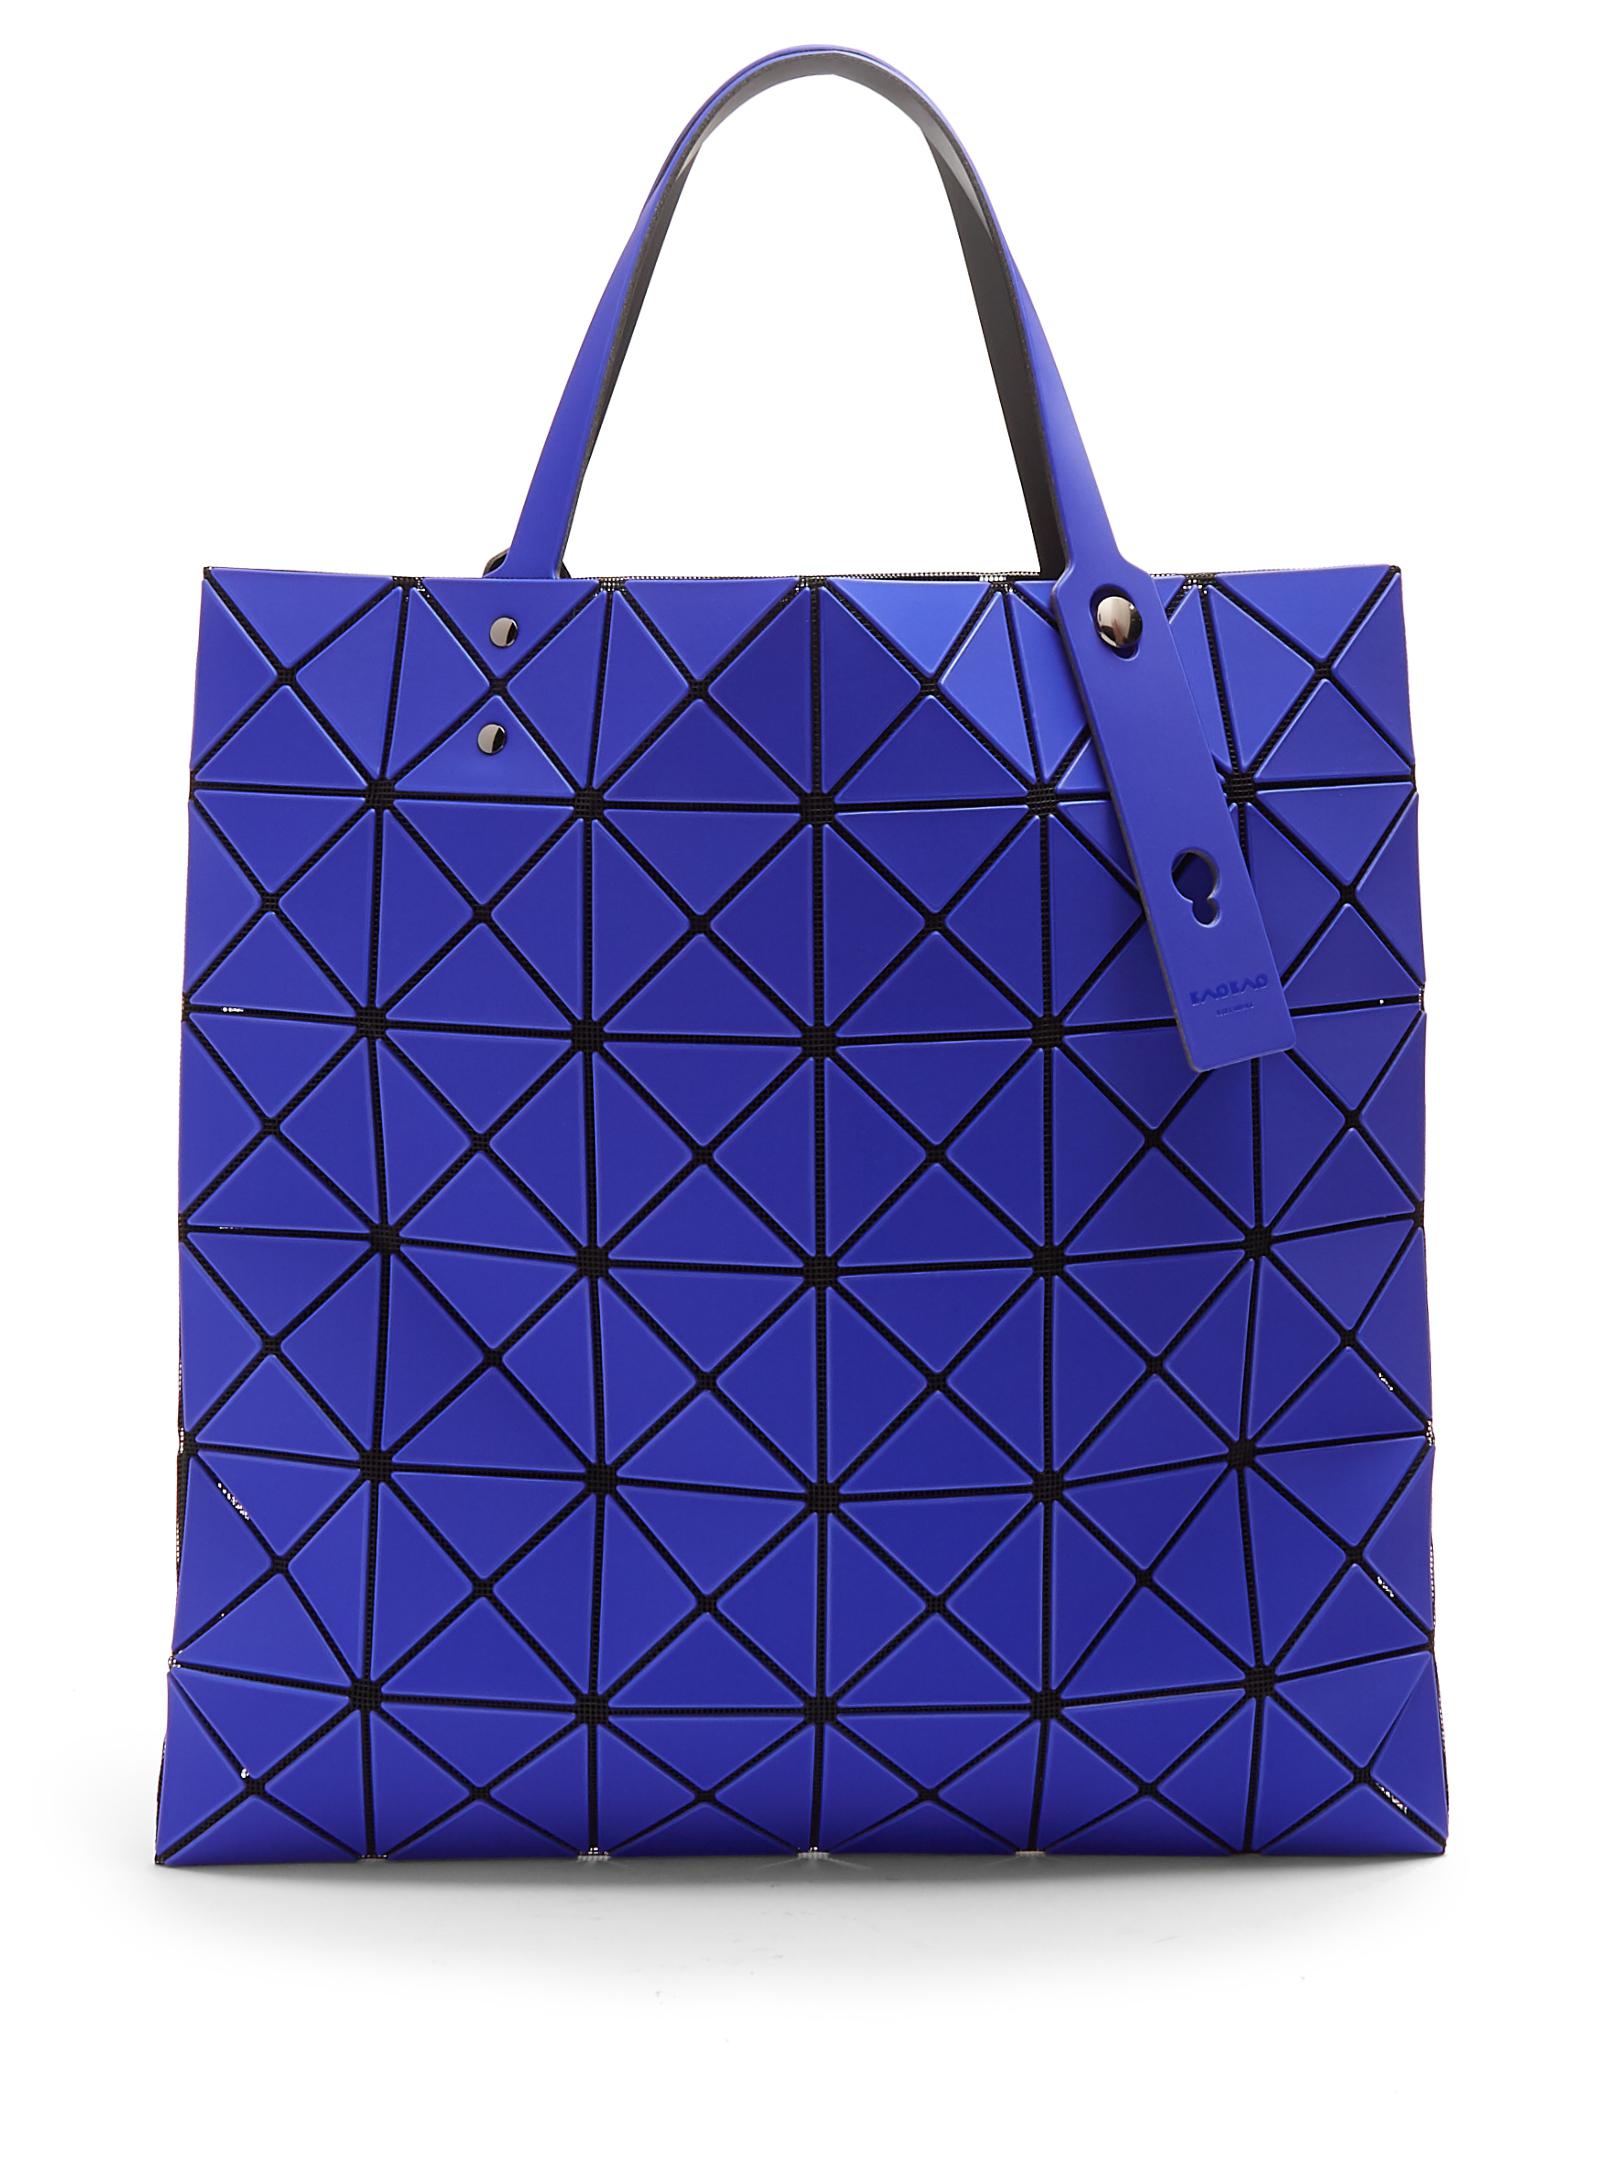 Bao Bao Issey Miyake Lucent Frost Tote in Blue - Lyst